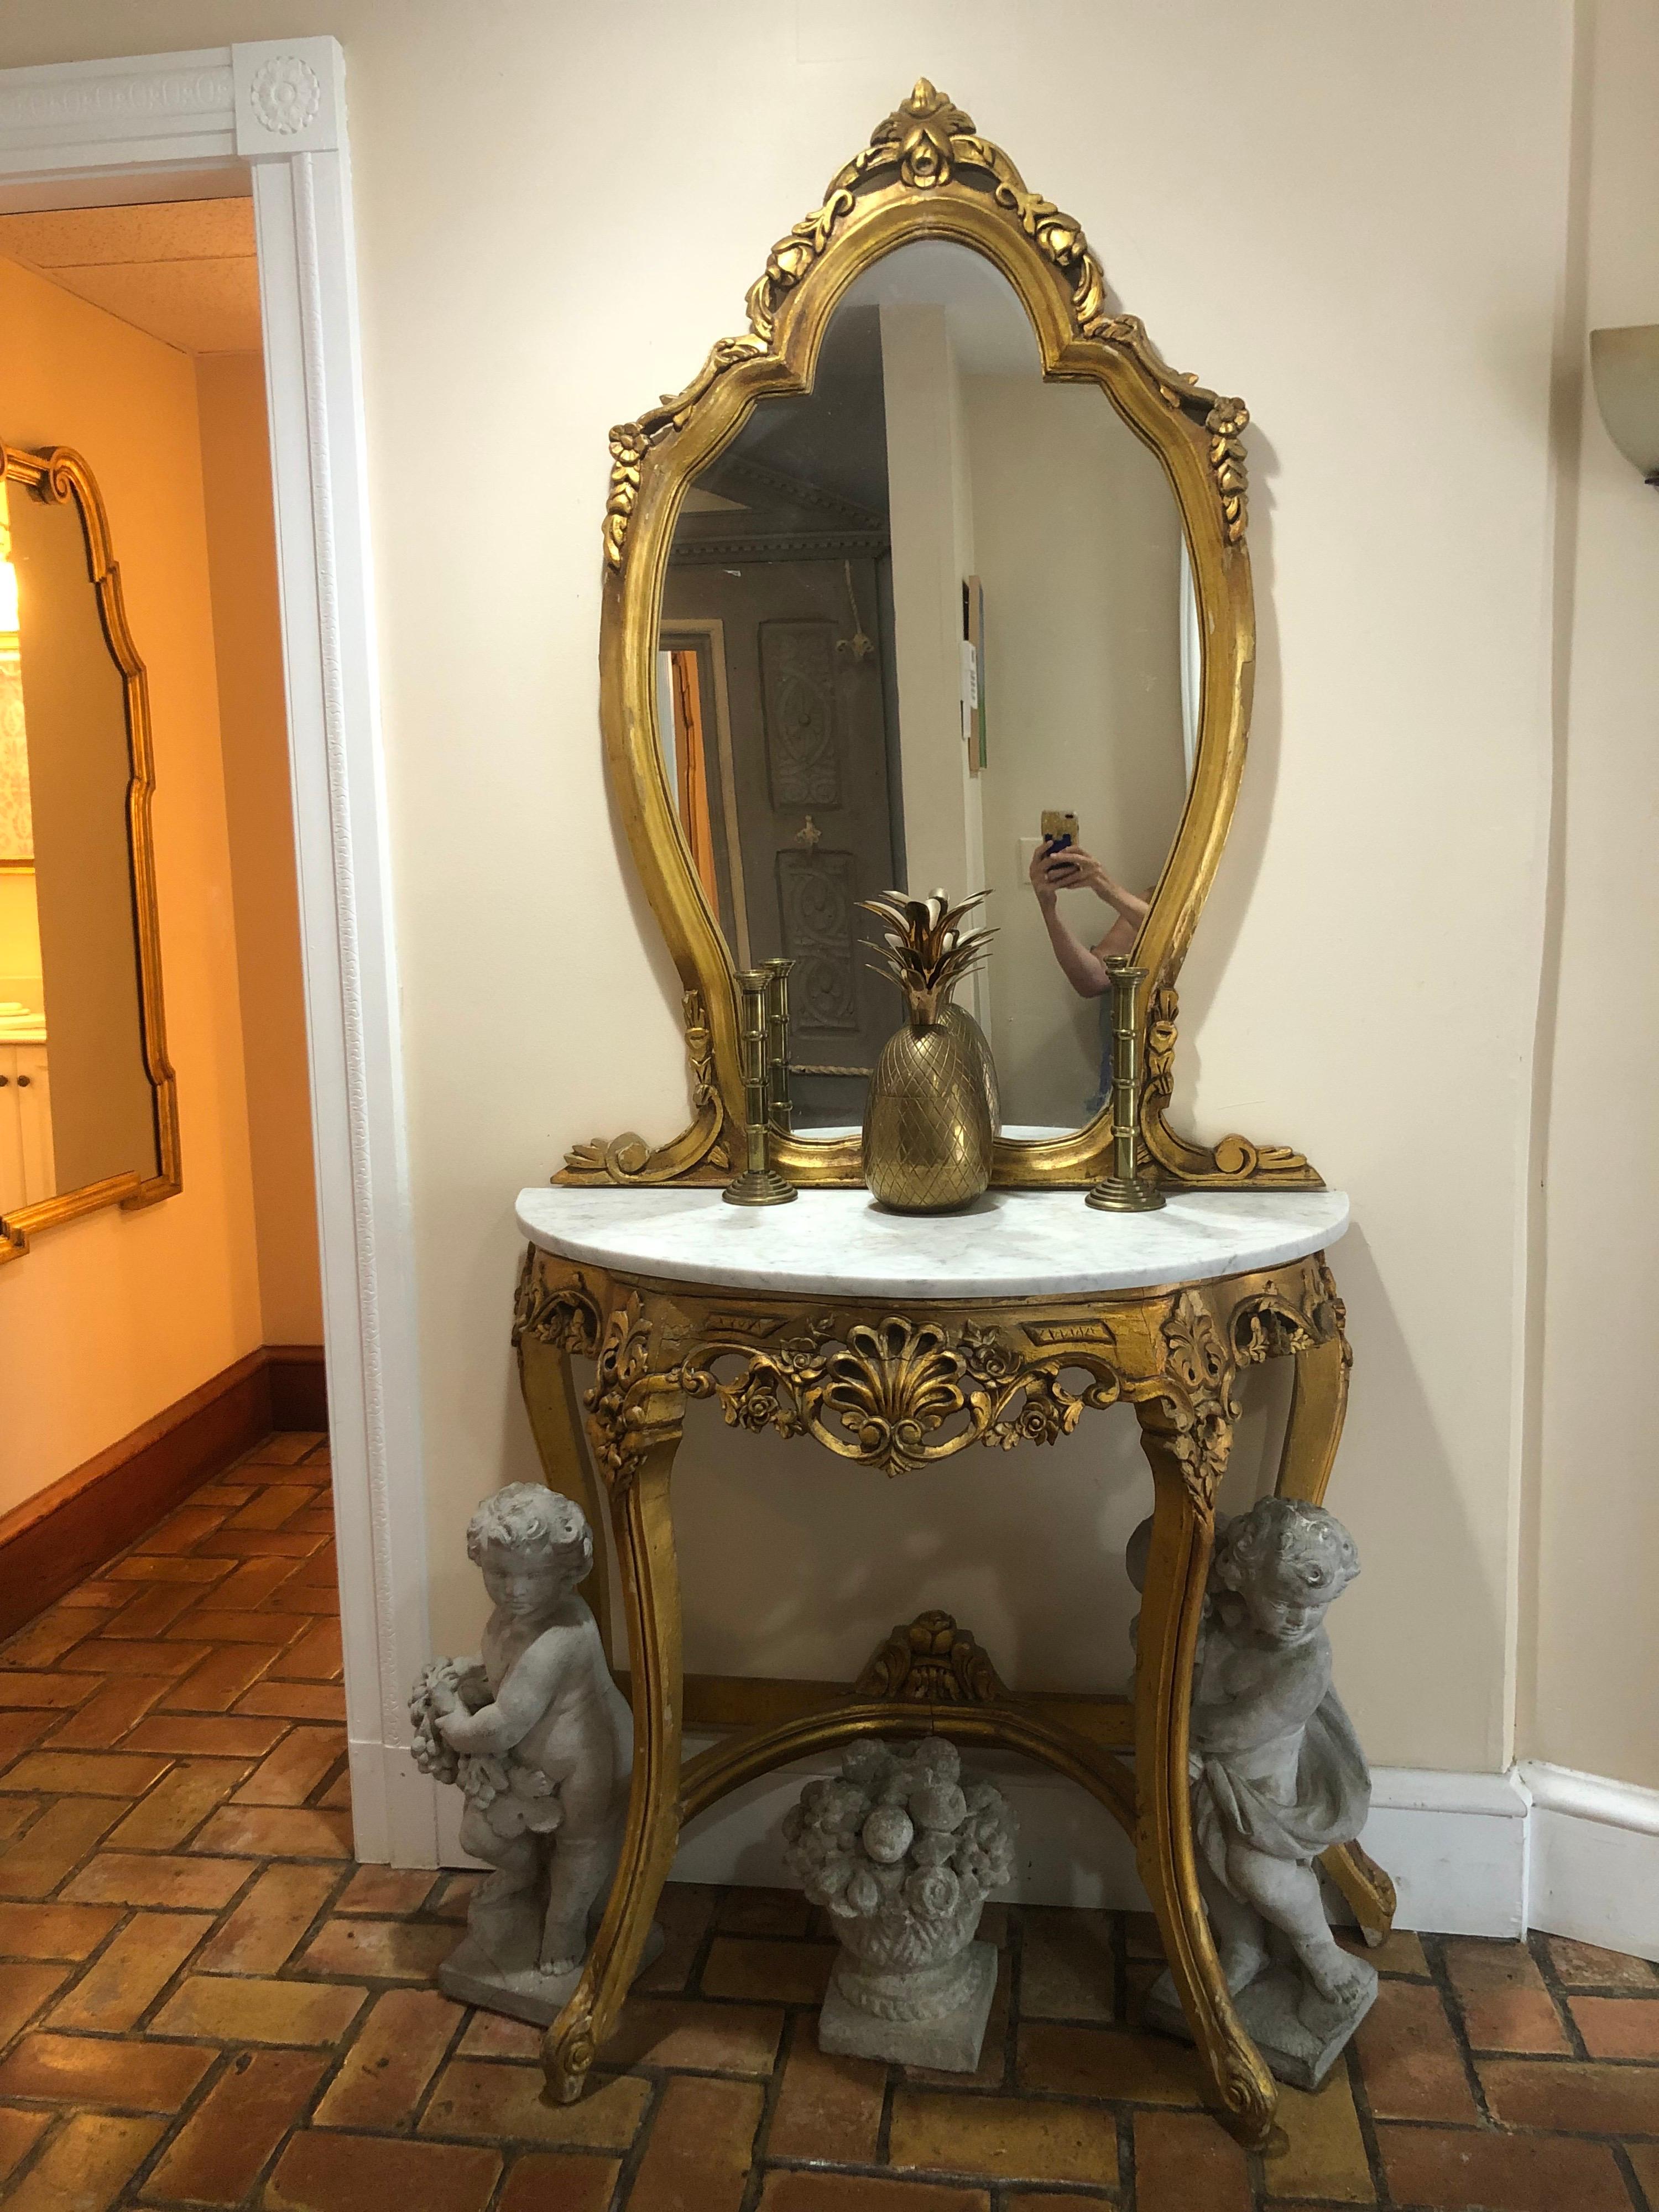 French gilt marble top demilune table with mirror. Two pieces. The mirror is hung on the wall and the base just rests on the marble. Open up your entryway with this elegant piece. The mirror alone measures 46